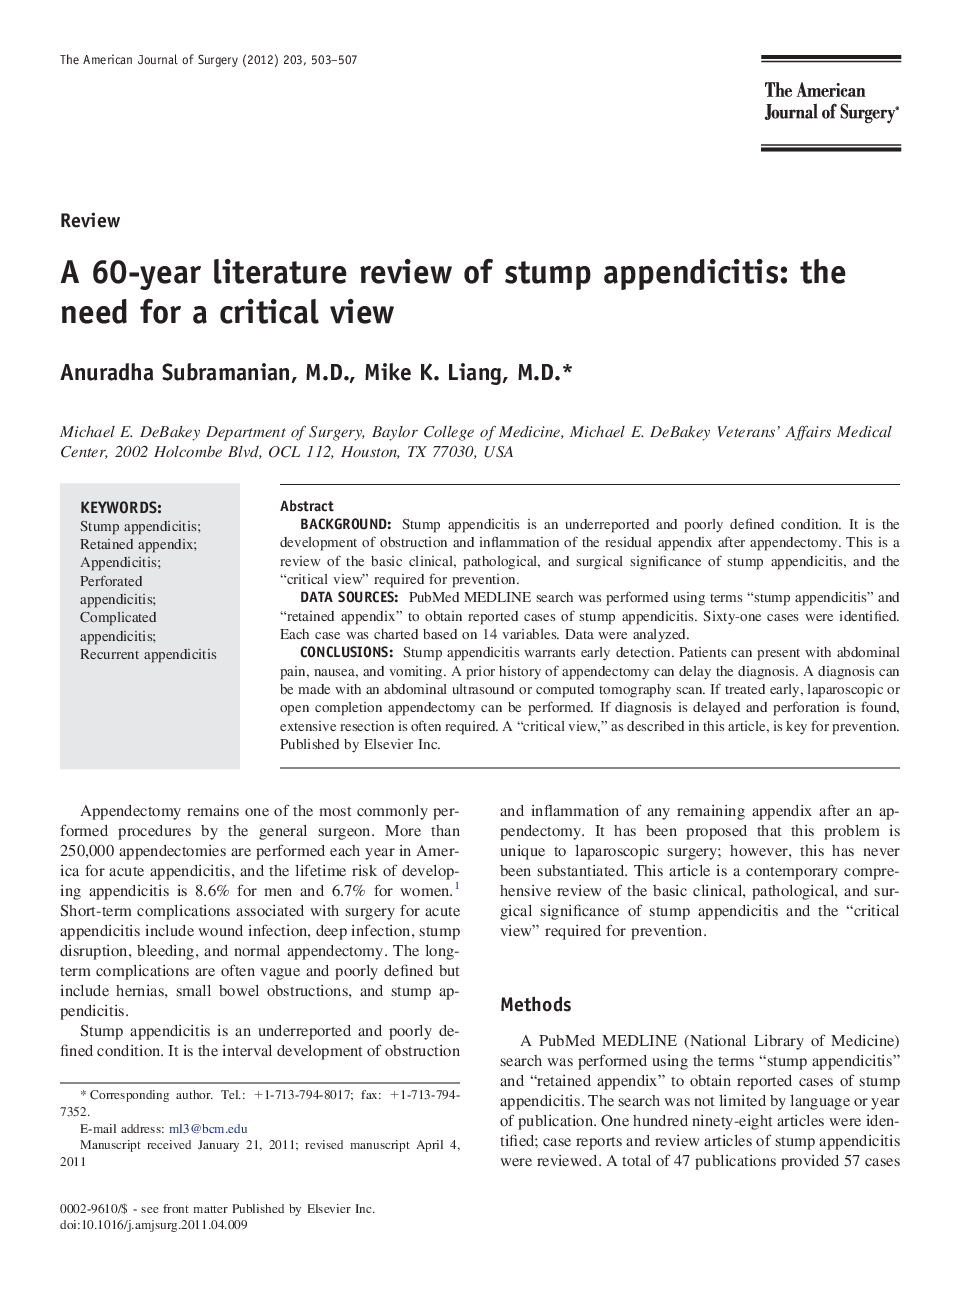 A 60-year literature review of stump appendicitis: the need for a critical view